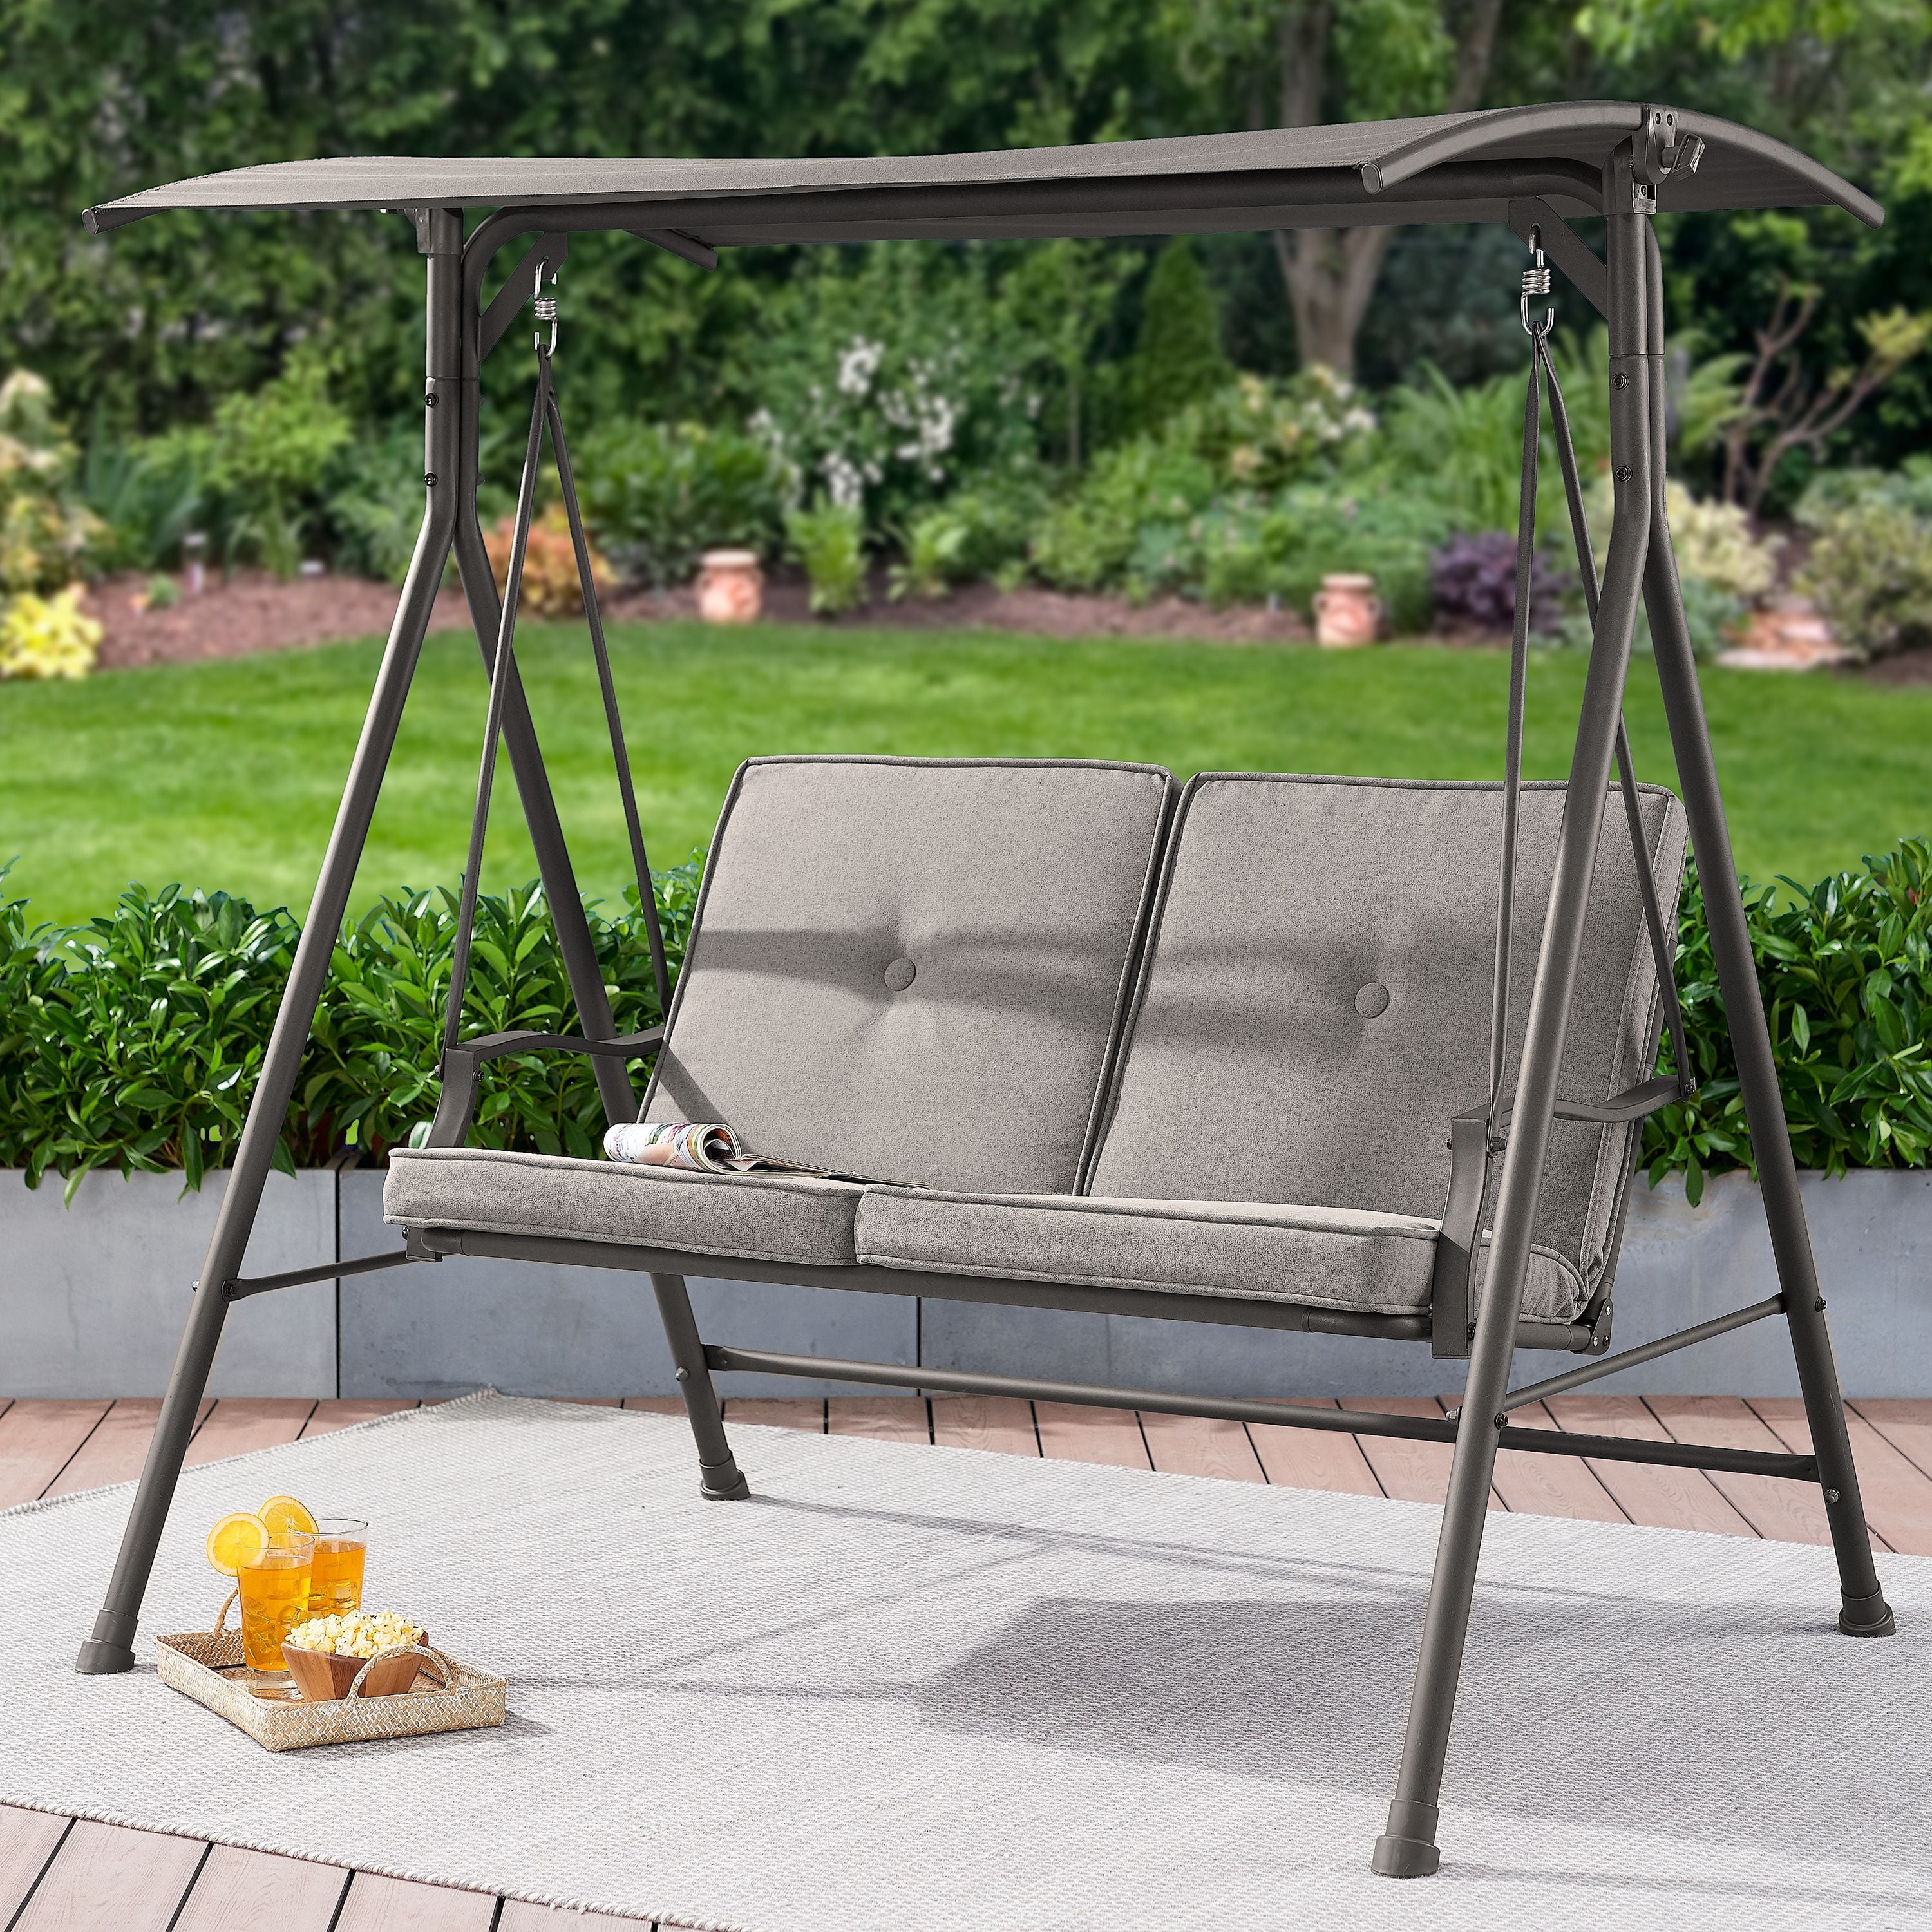 Mainstays Holten Ridge TwoSeat Canopy Patio Swing with Gray Cushions